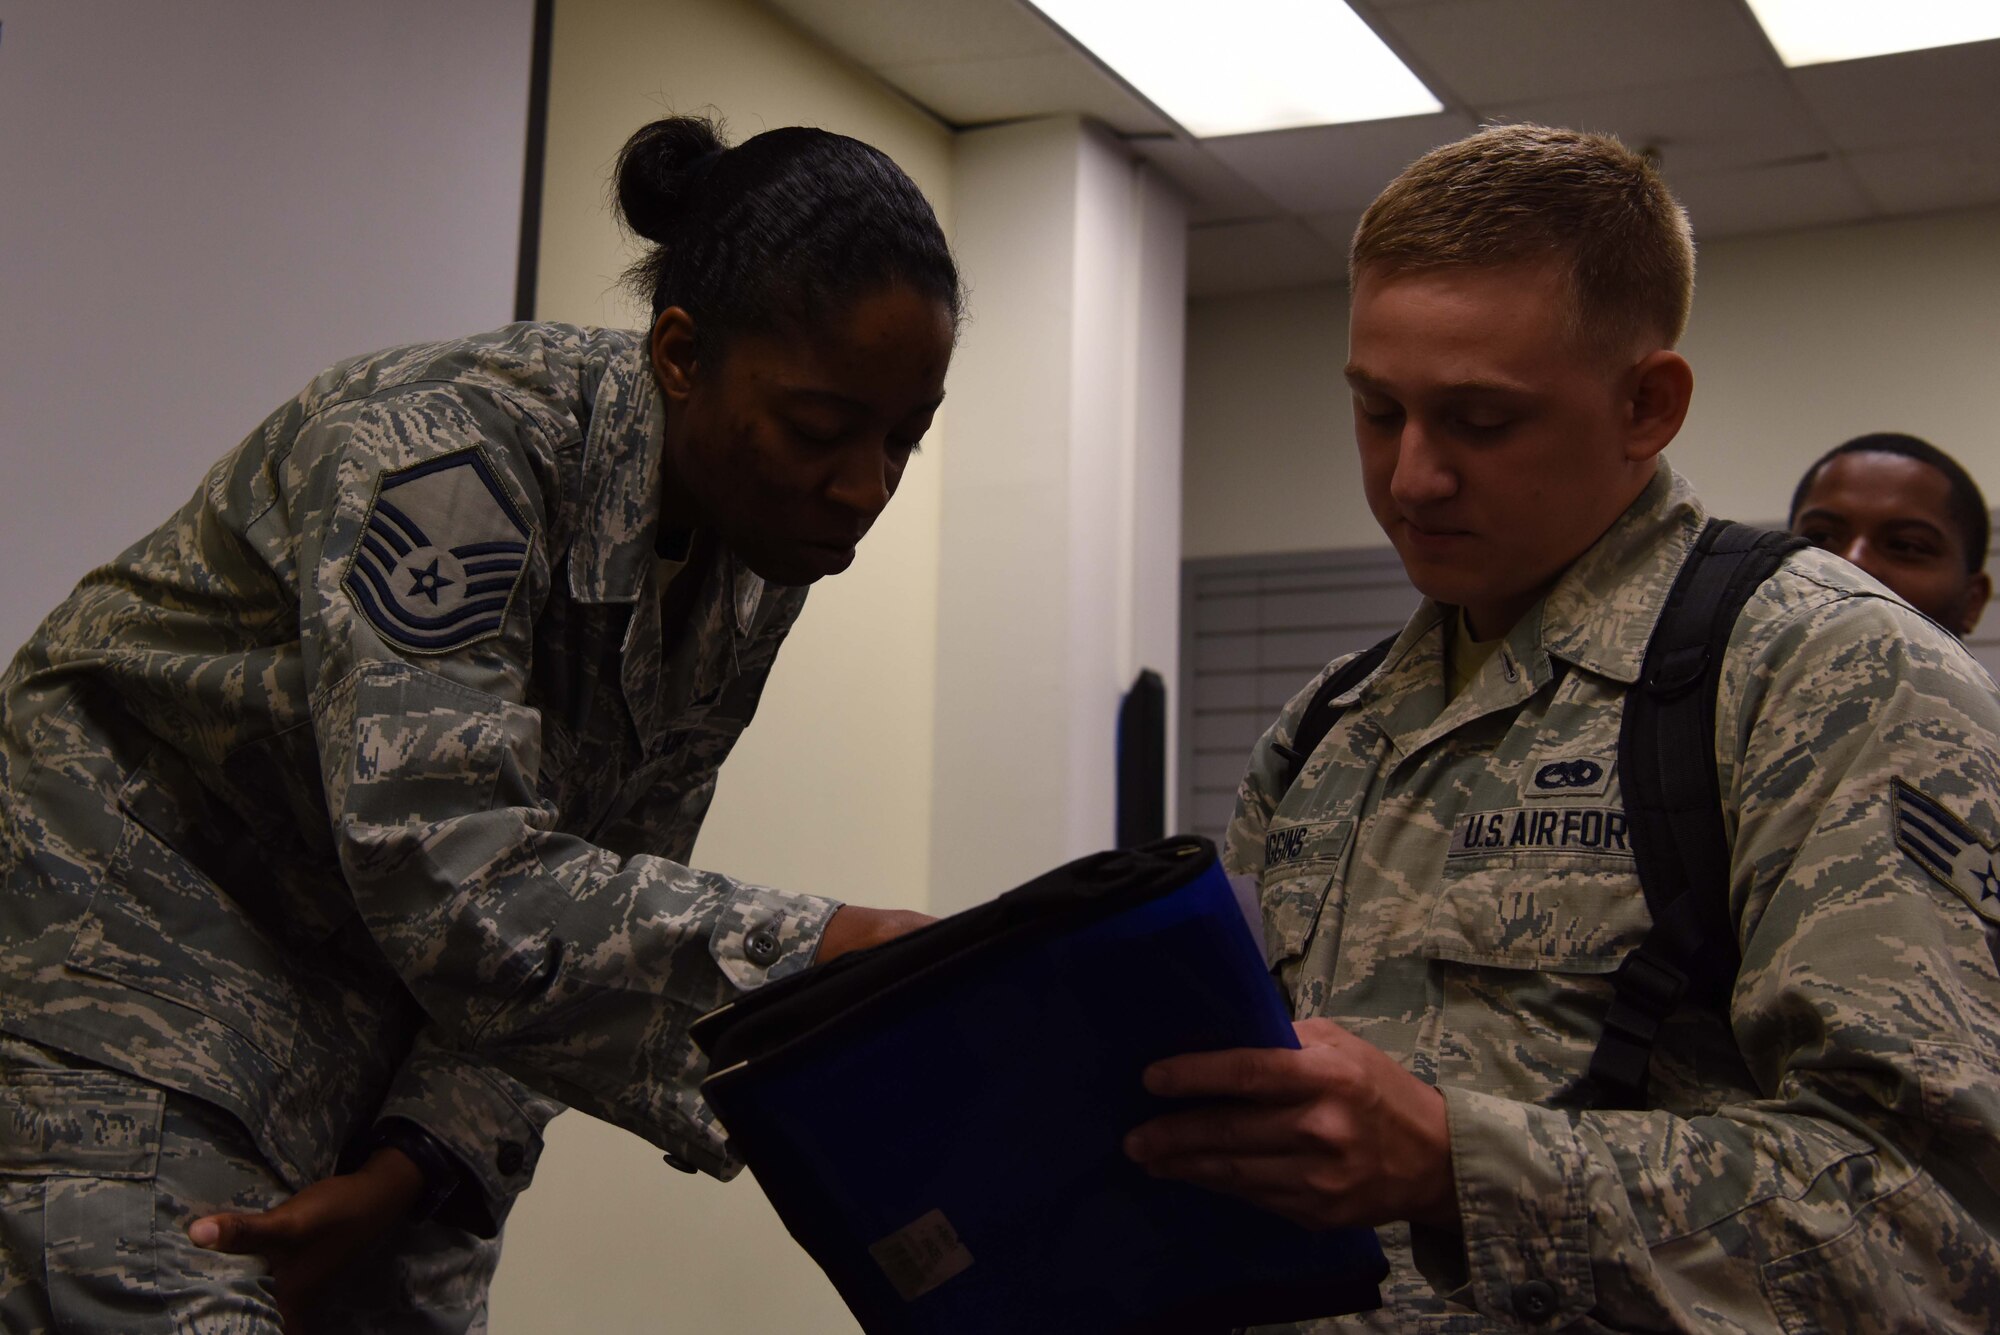 U.S. Air Force Master Sgt. Venita Miles, Pacific Air Forces in-service recruiter, looks over Palace Front paperwork for aircraft maintenance crew chief, Senior Airman Nicholas Higgins, at Kunsan Air Base, Republic of Korea, July 19, 2018. Miles services all Airmen assigned to Yokota, Misawa, Kunsan, and Osan Air Bases.